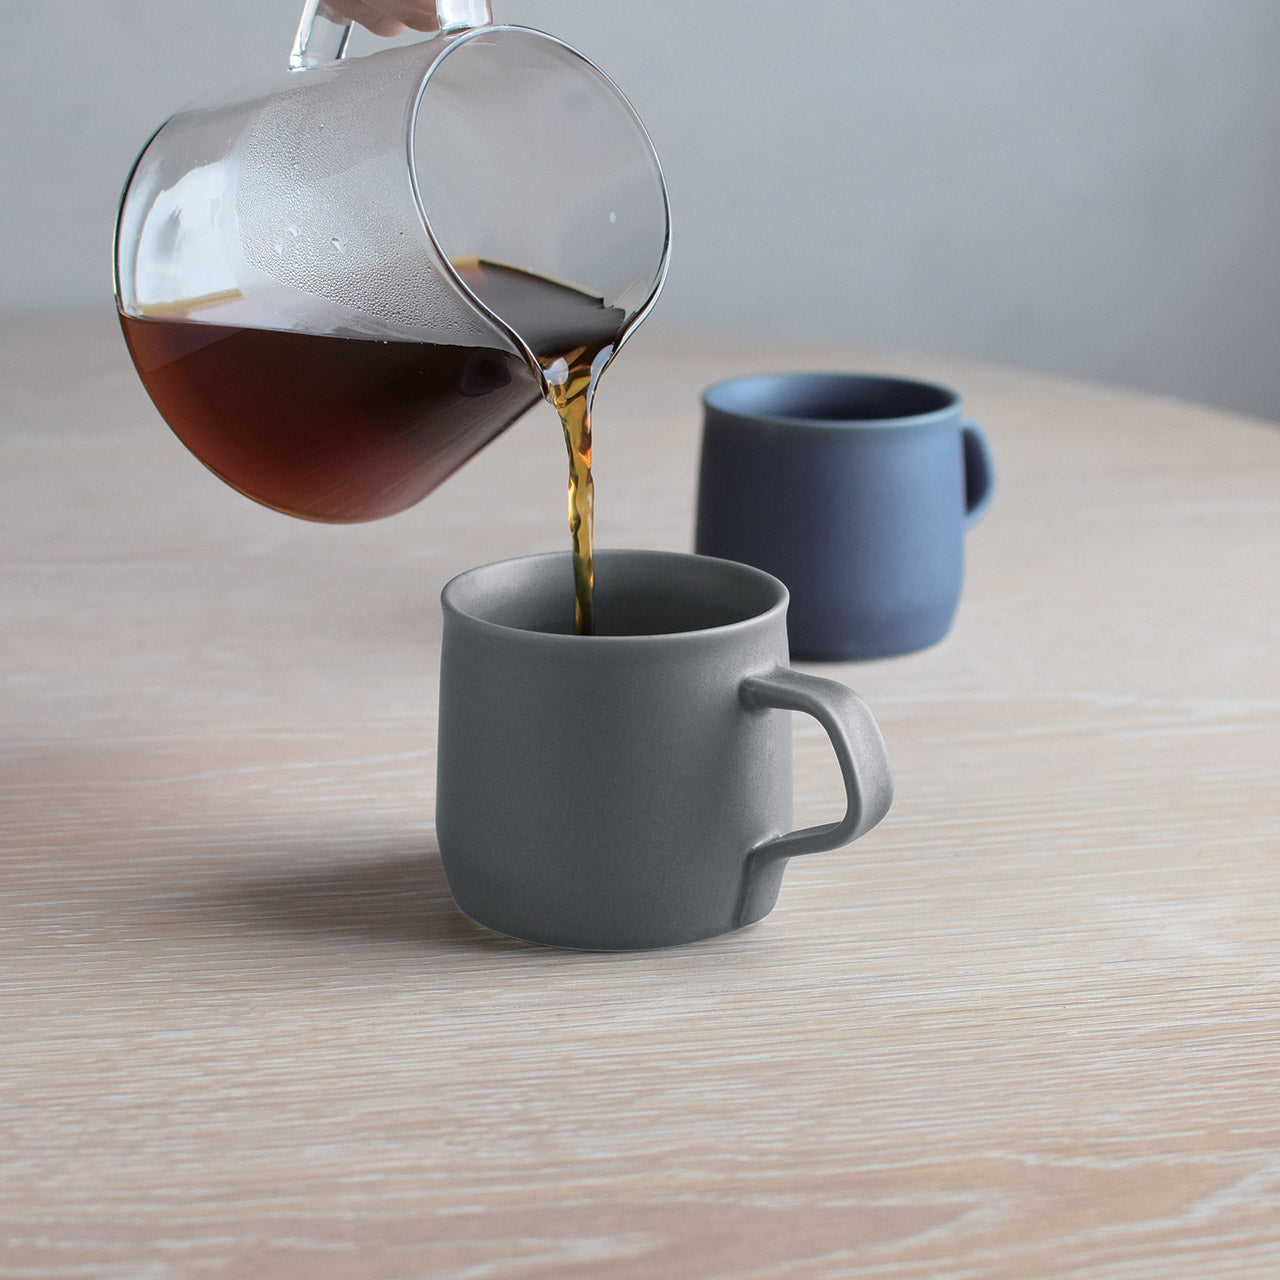 Kinto Fog Mugs with coffee pouring into them